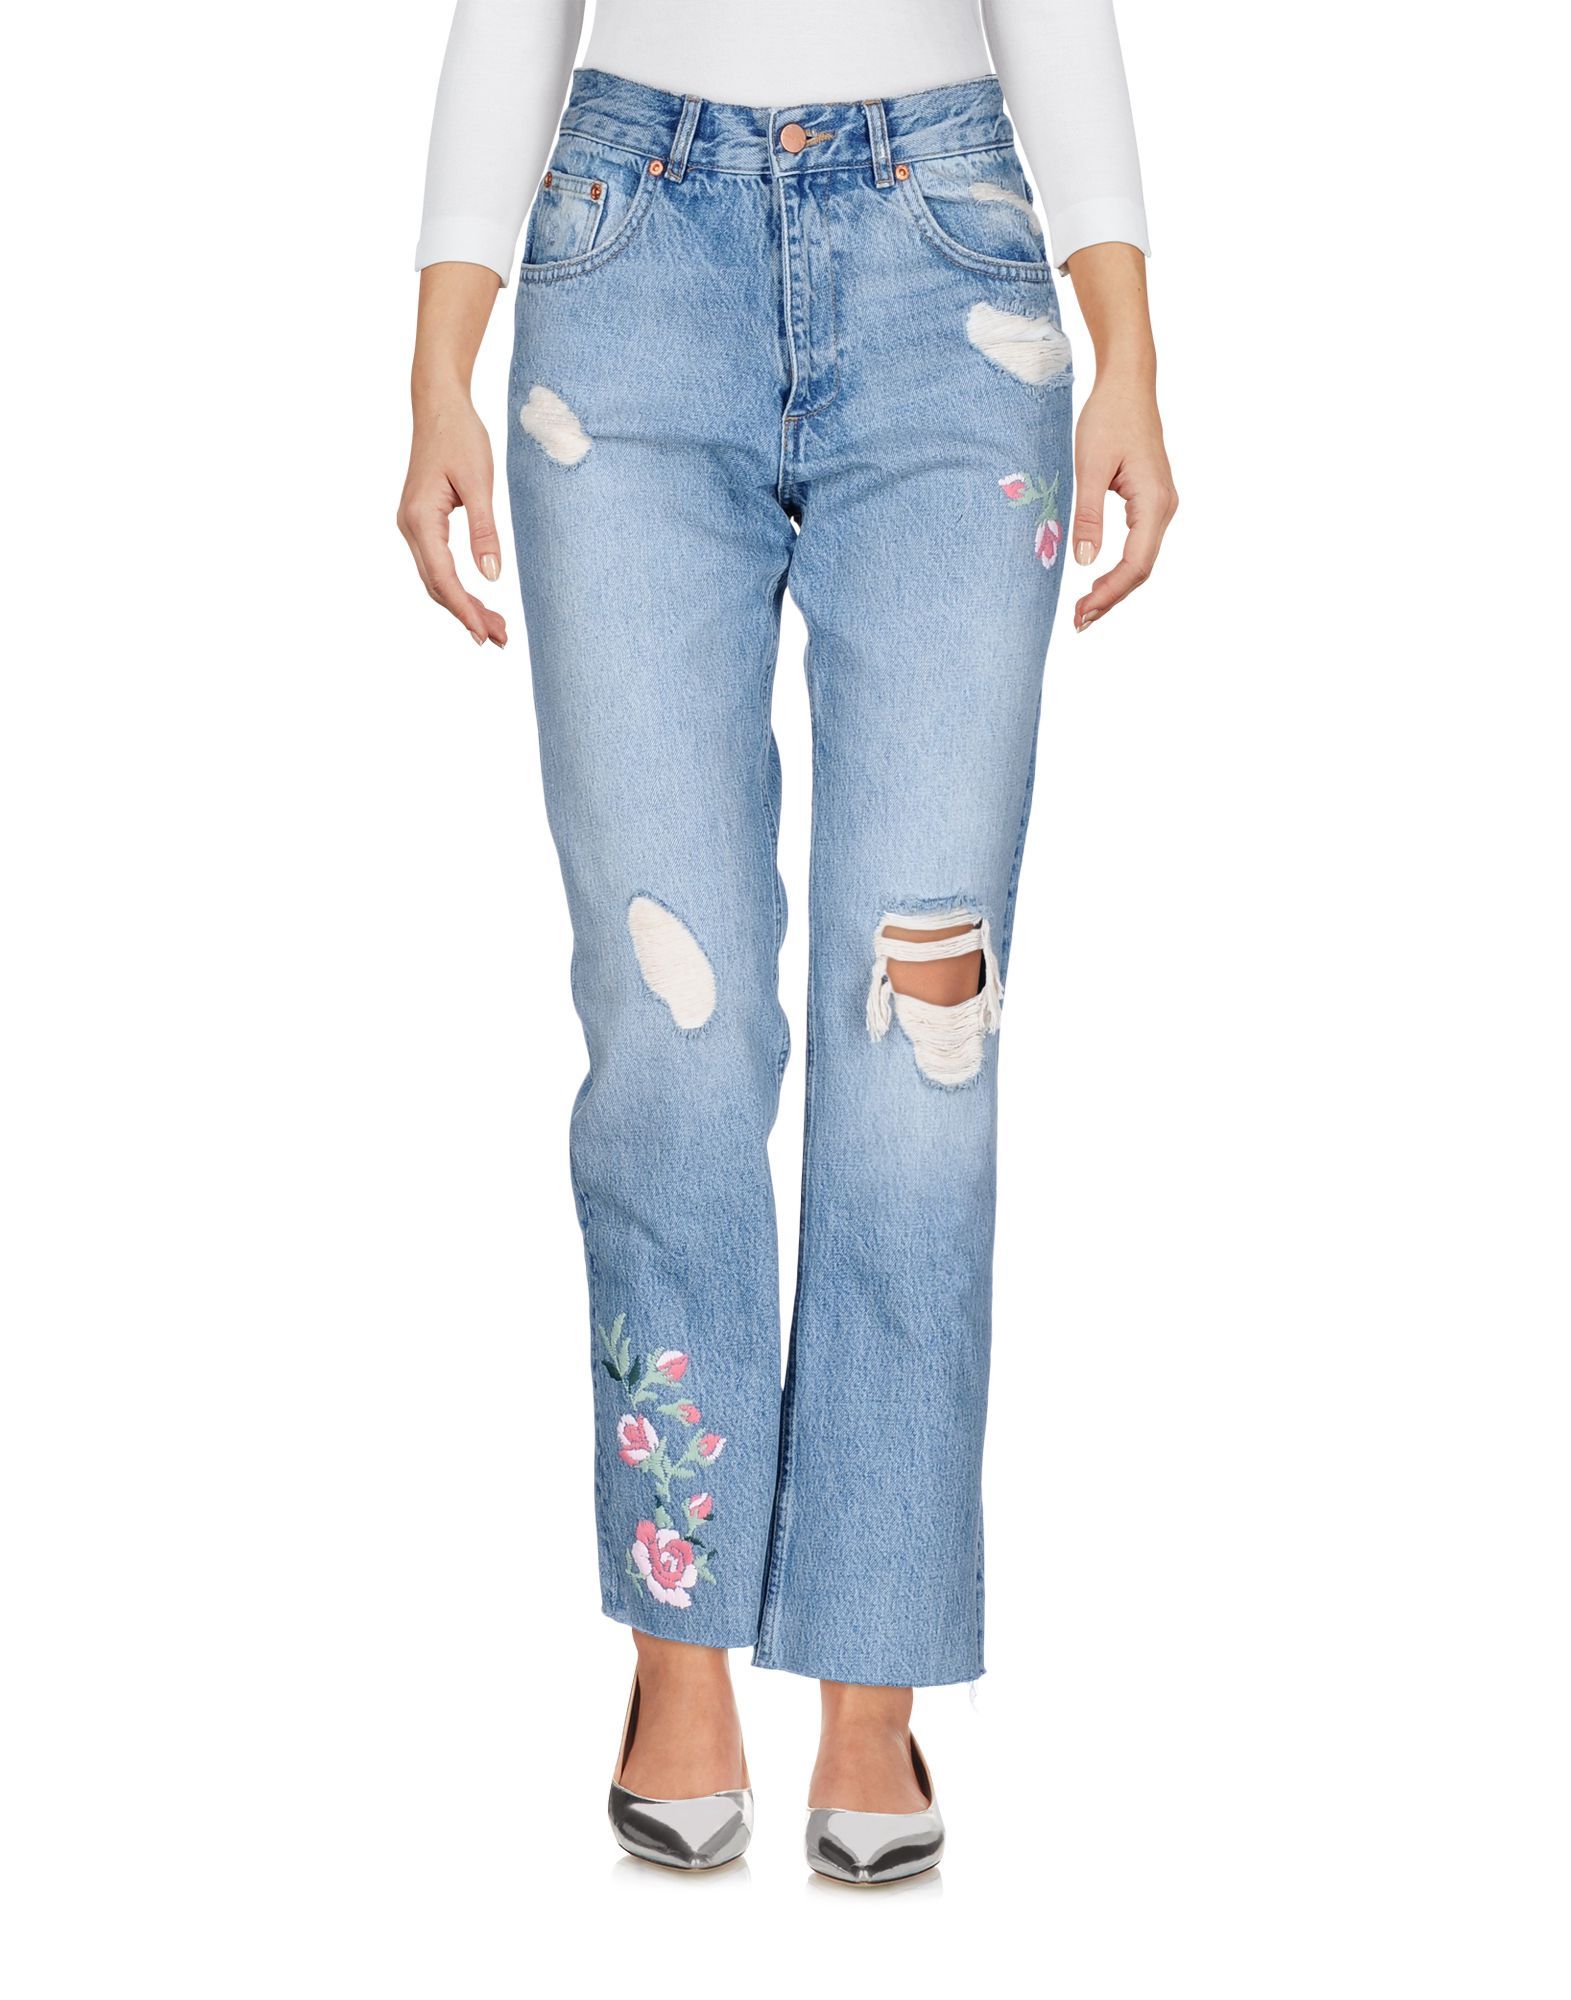 denim, worn effect, faded, logo, embroidered detailing, solid colour, dark wash, high waisted, front closure, button, zip, multipockets, raw-cut hem, contains non-textile parts of animal origin, comfort fit